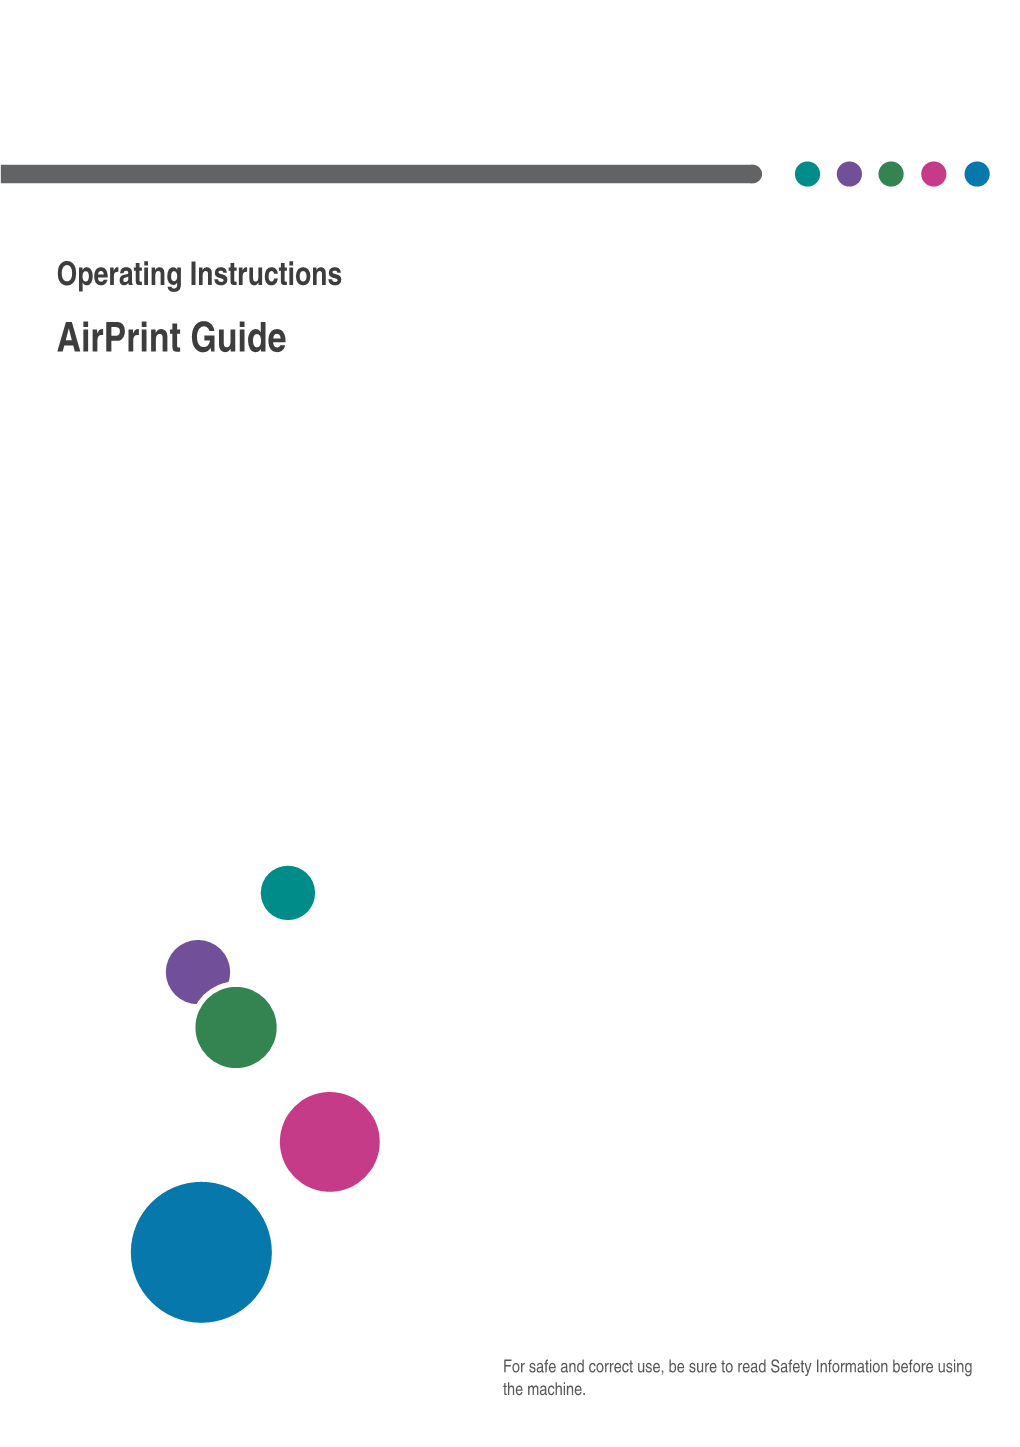 Operating Instructions Airprint Guide